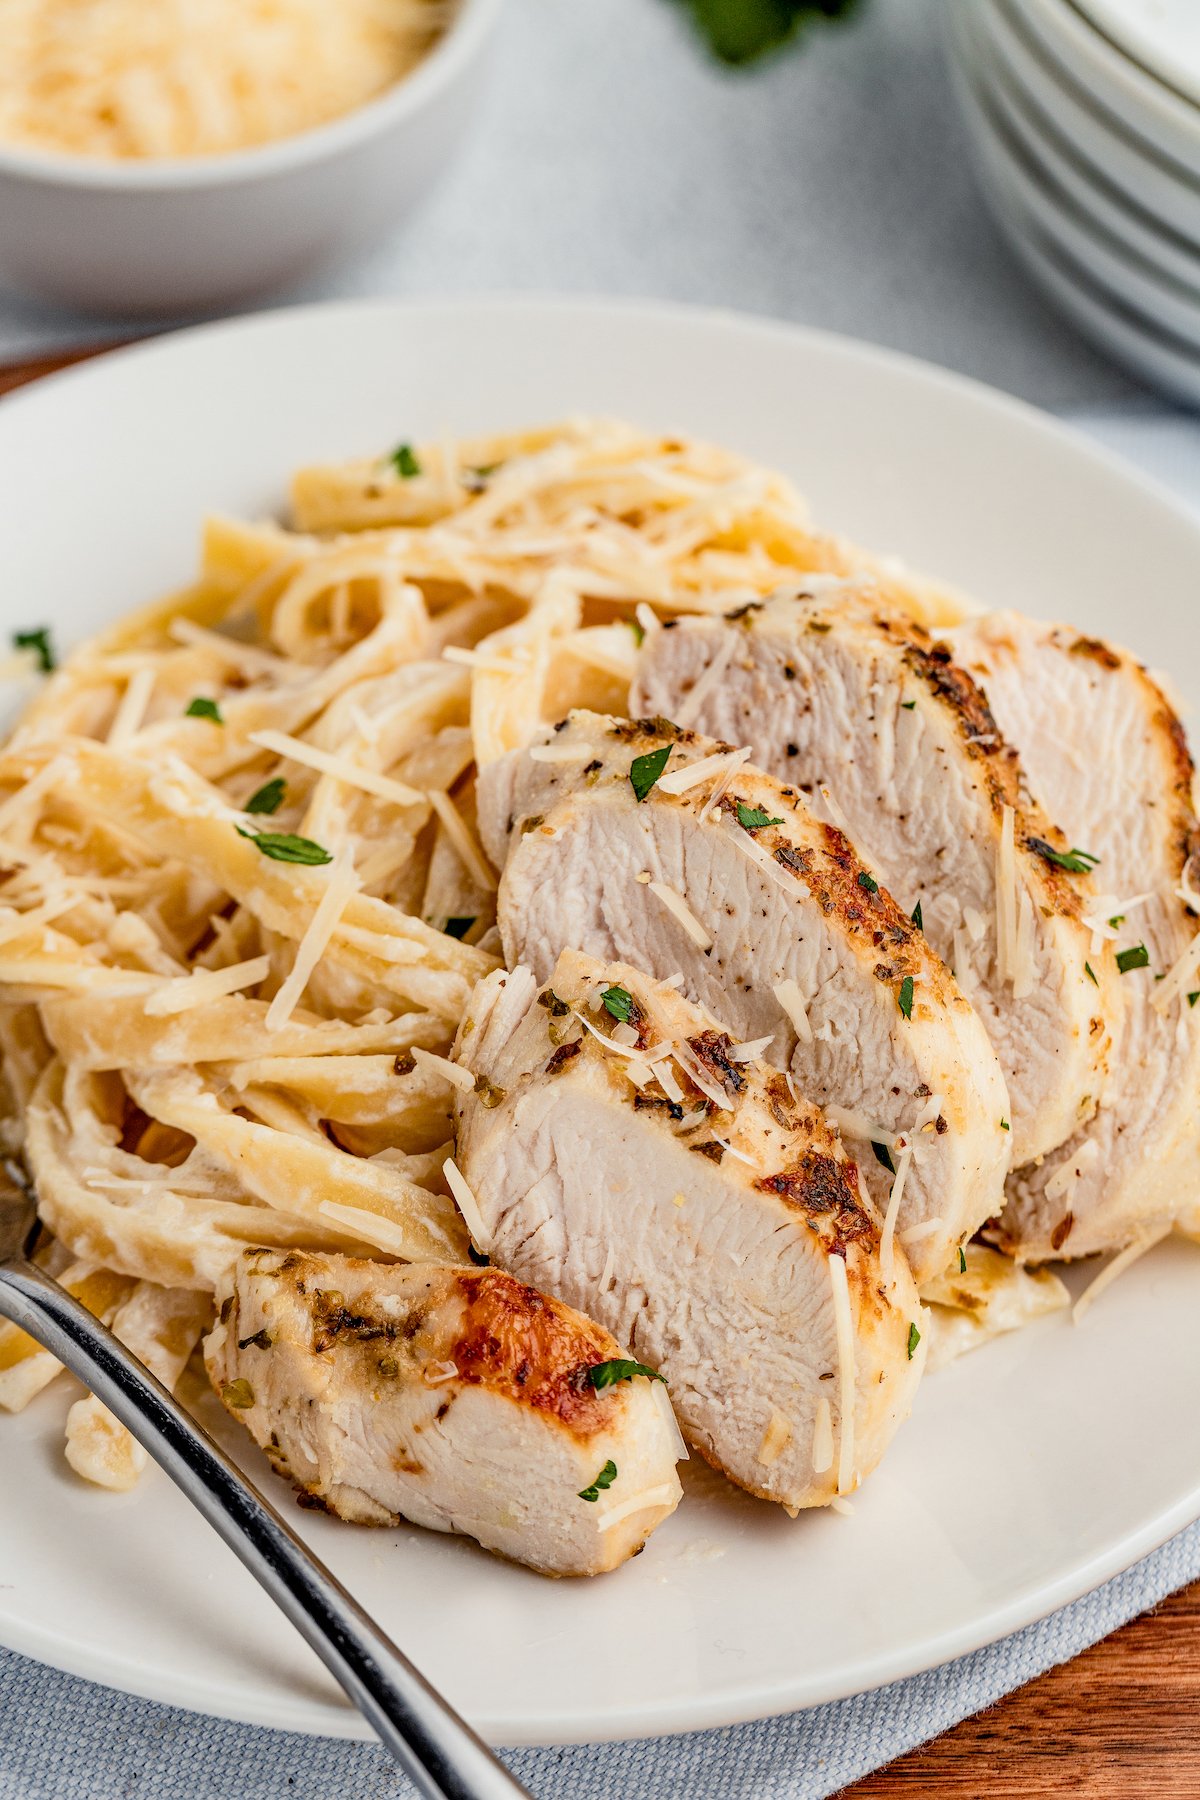 Fettuccine on a plate, with sliced chicken fanned along the side of the pasta.